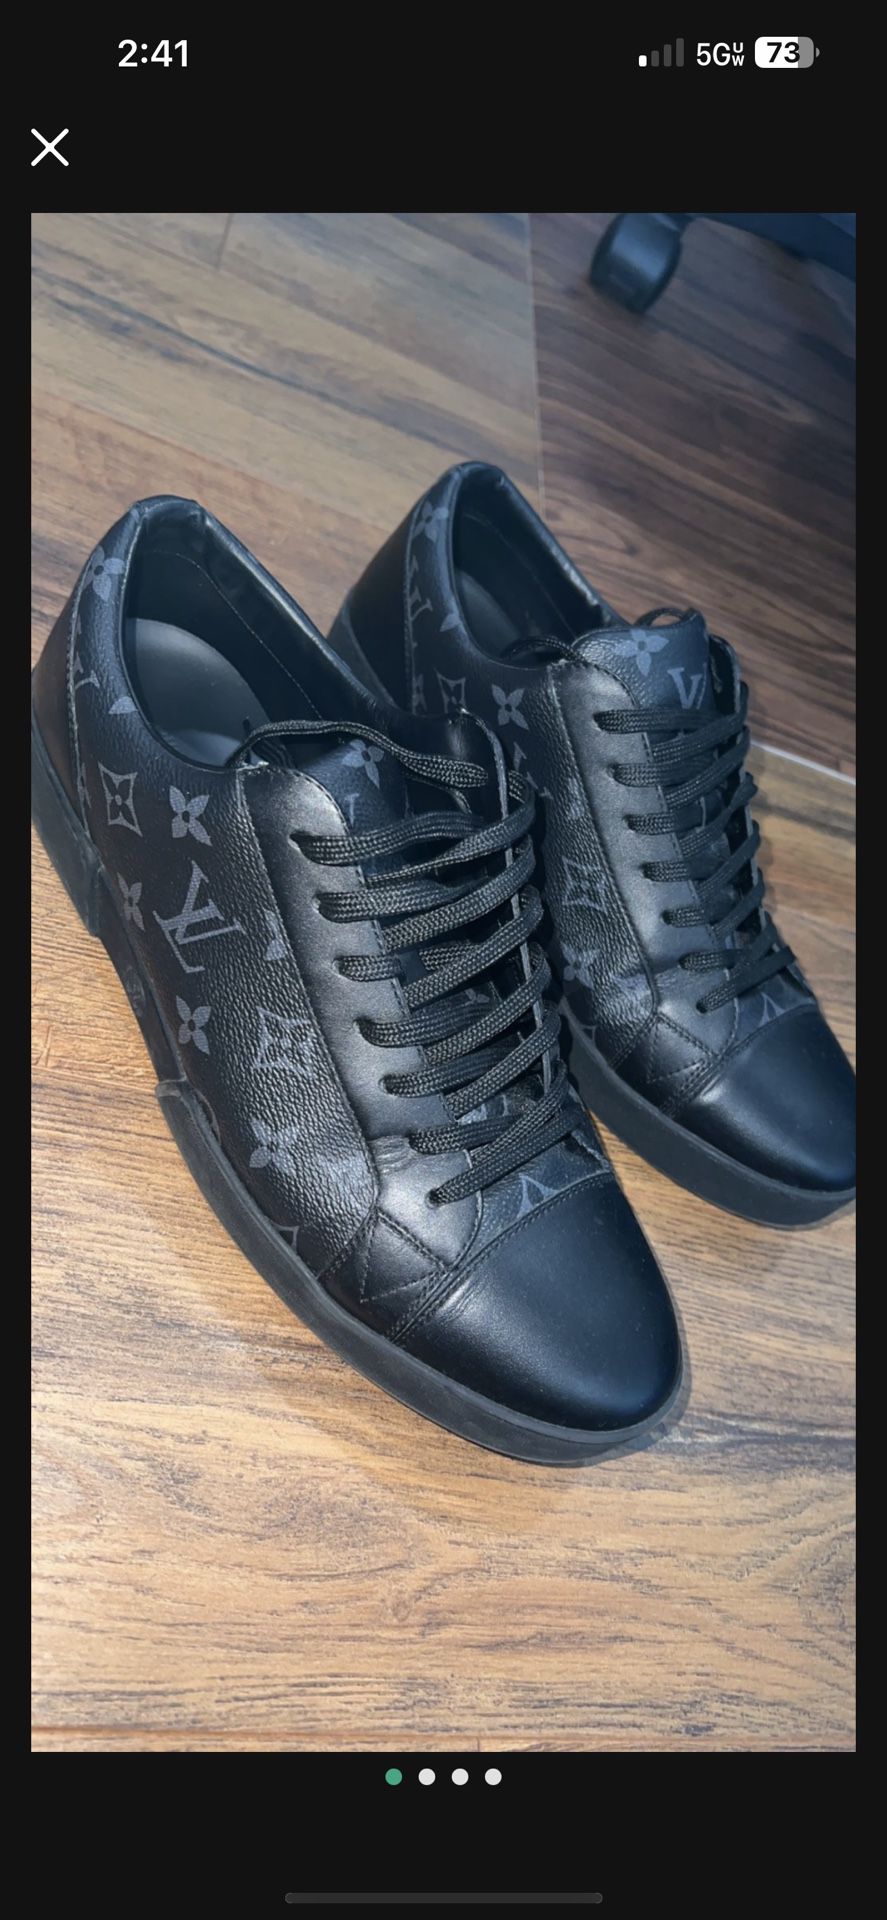 MUST GO Like New Gently Used Authentic Louis Vuitton Shoes for Sale in  Sterling Heights, MI - OfferUp